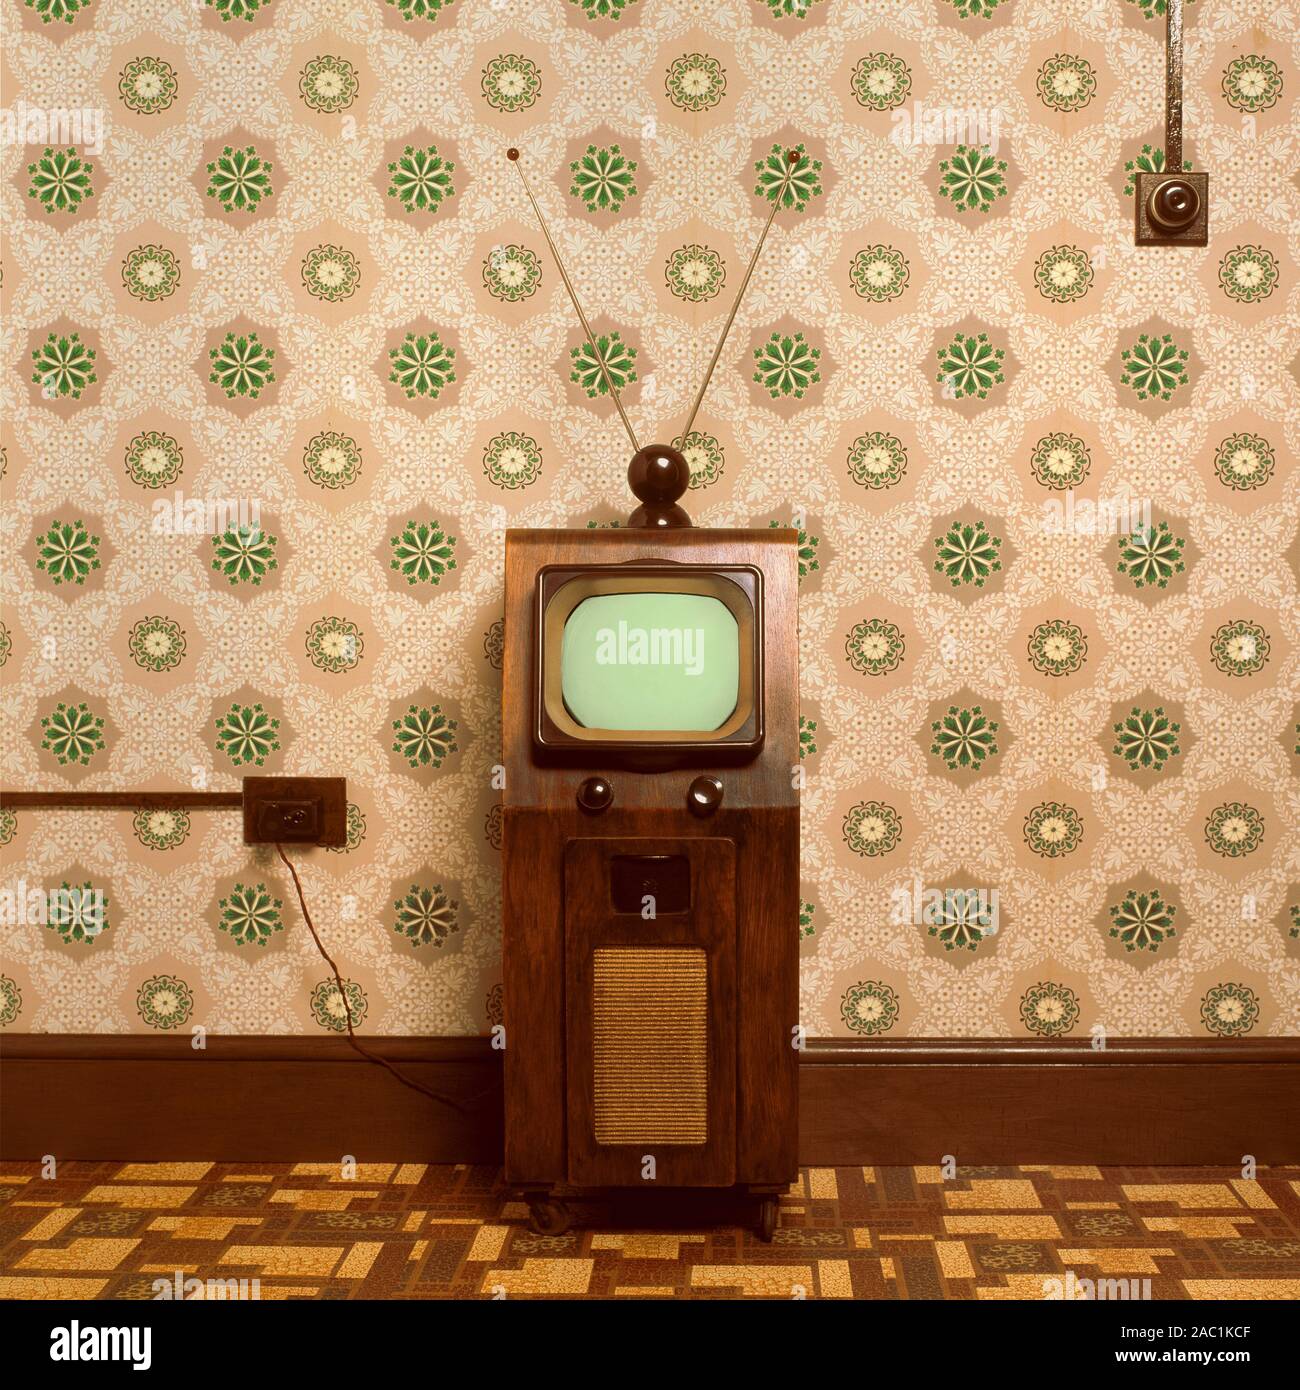 Old television Stock Photo